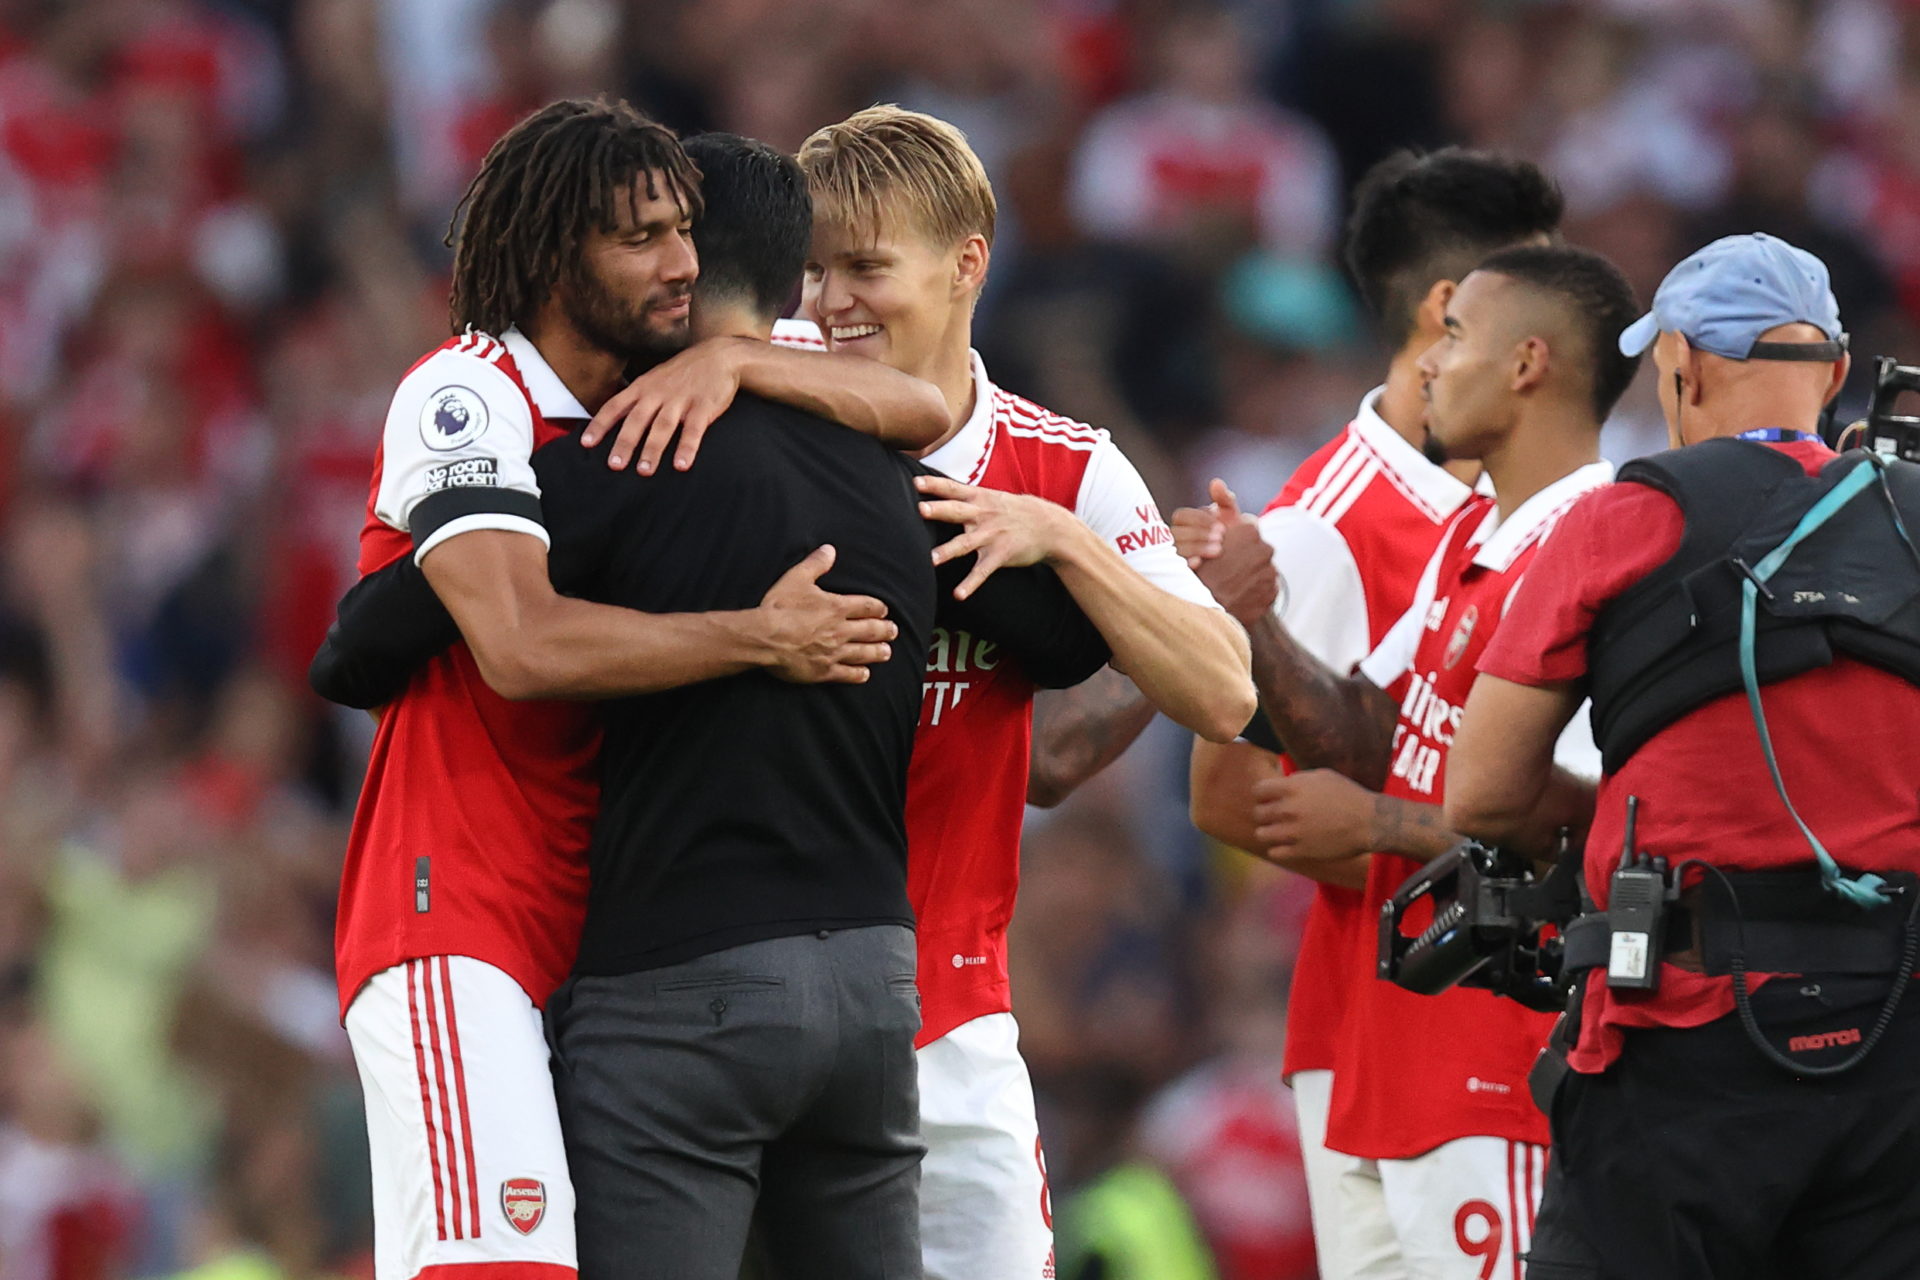 'Dress sense is horrendous': Aaron Ramsdale admits one of his Arsenal teammates is a bit 'strange'